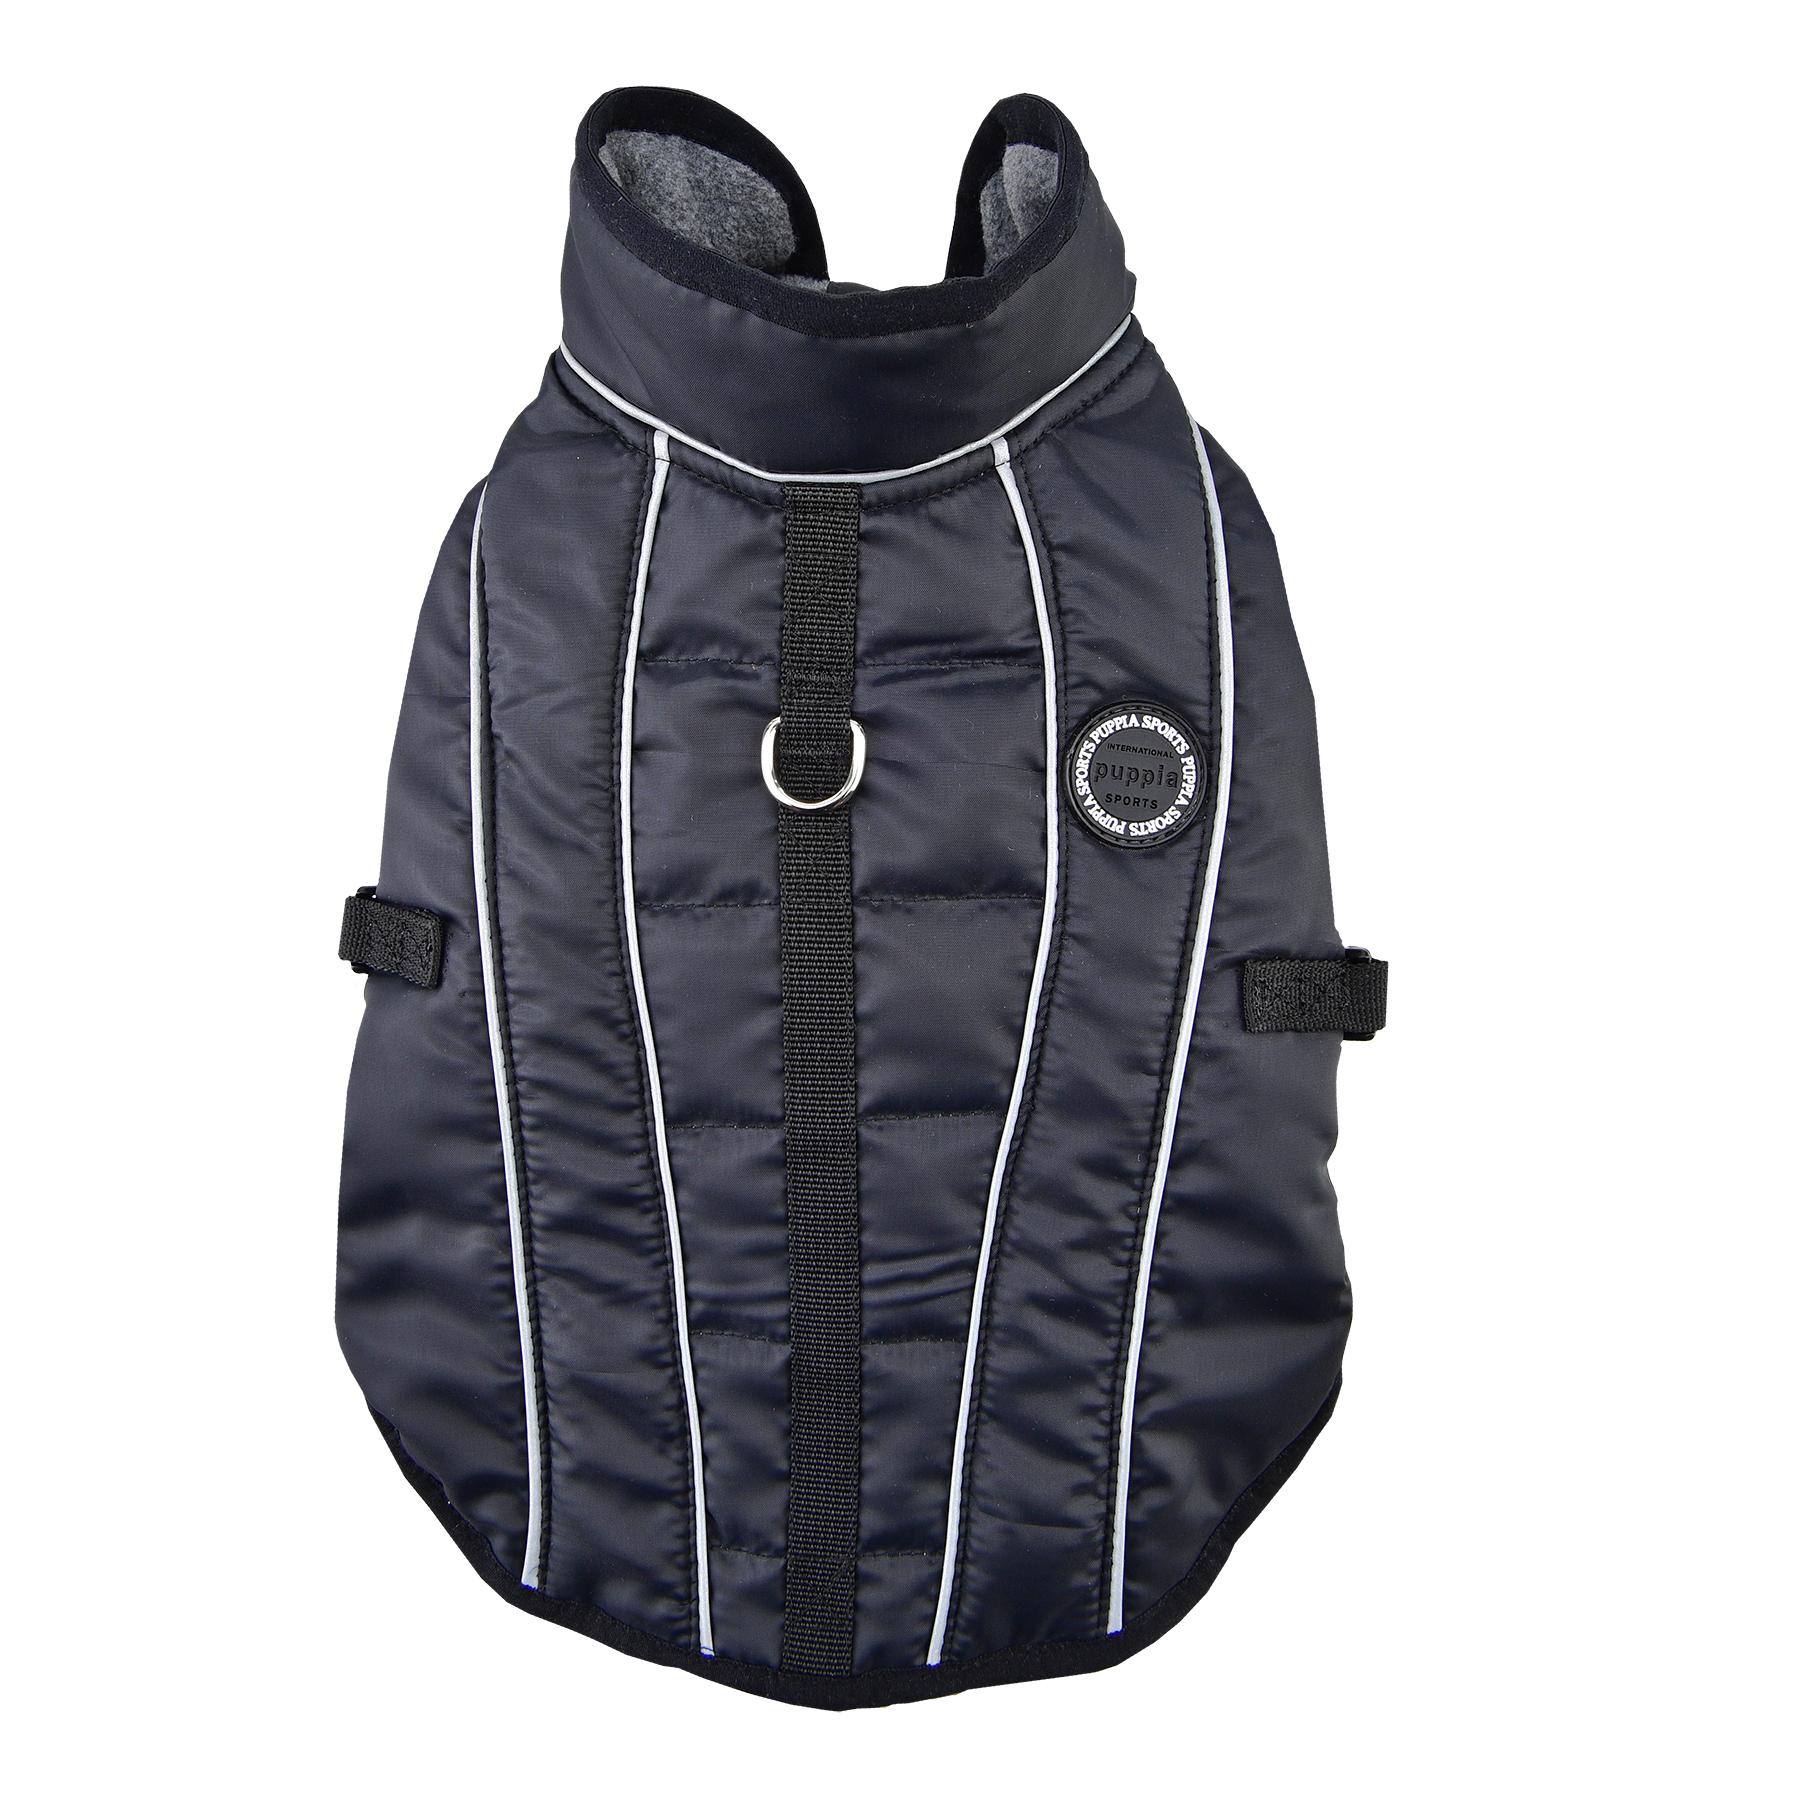 Expedition Quilted Vest By Puppia Life - Black